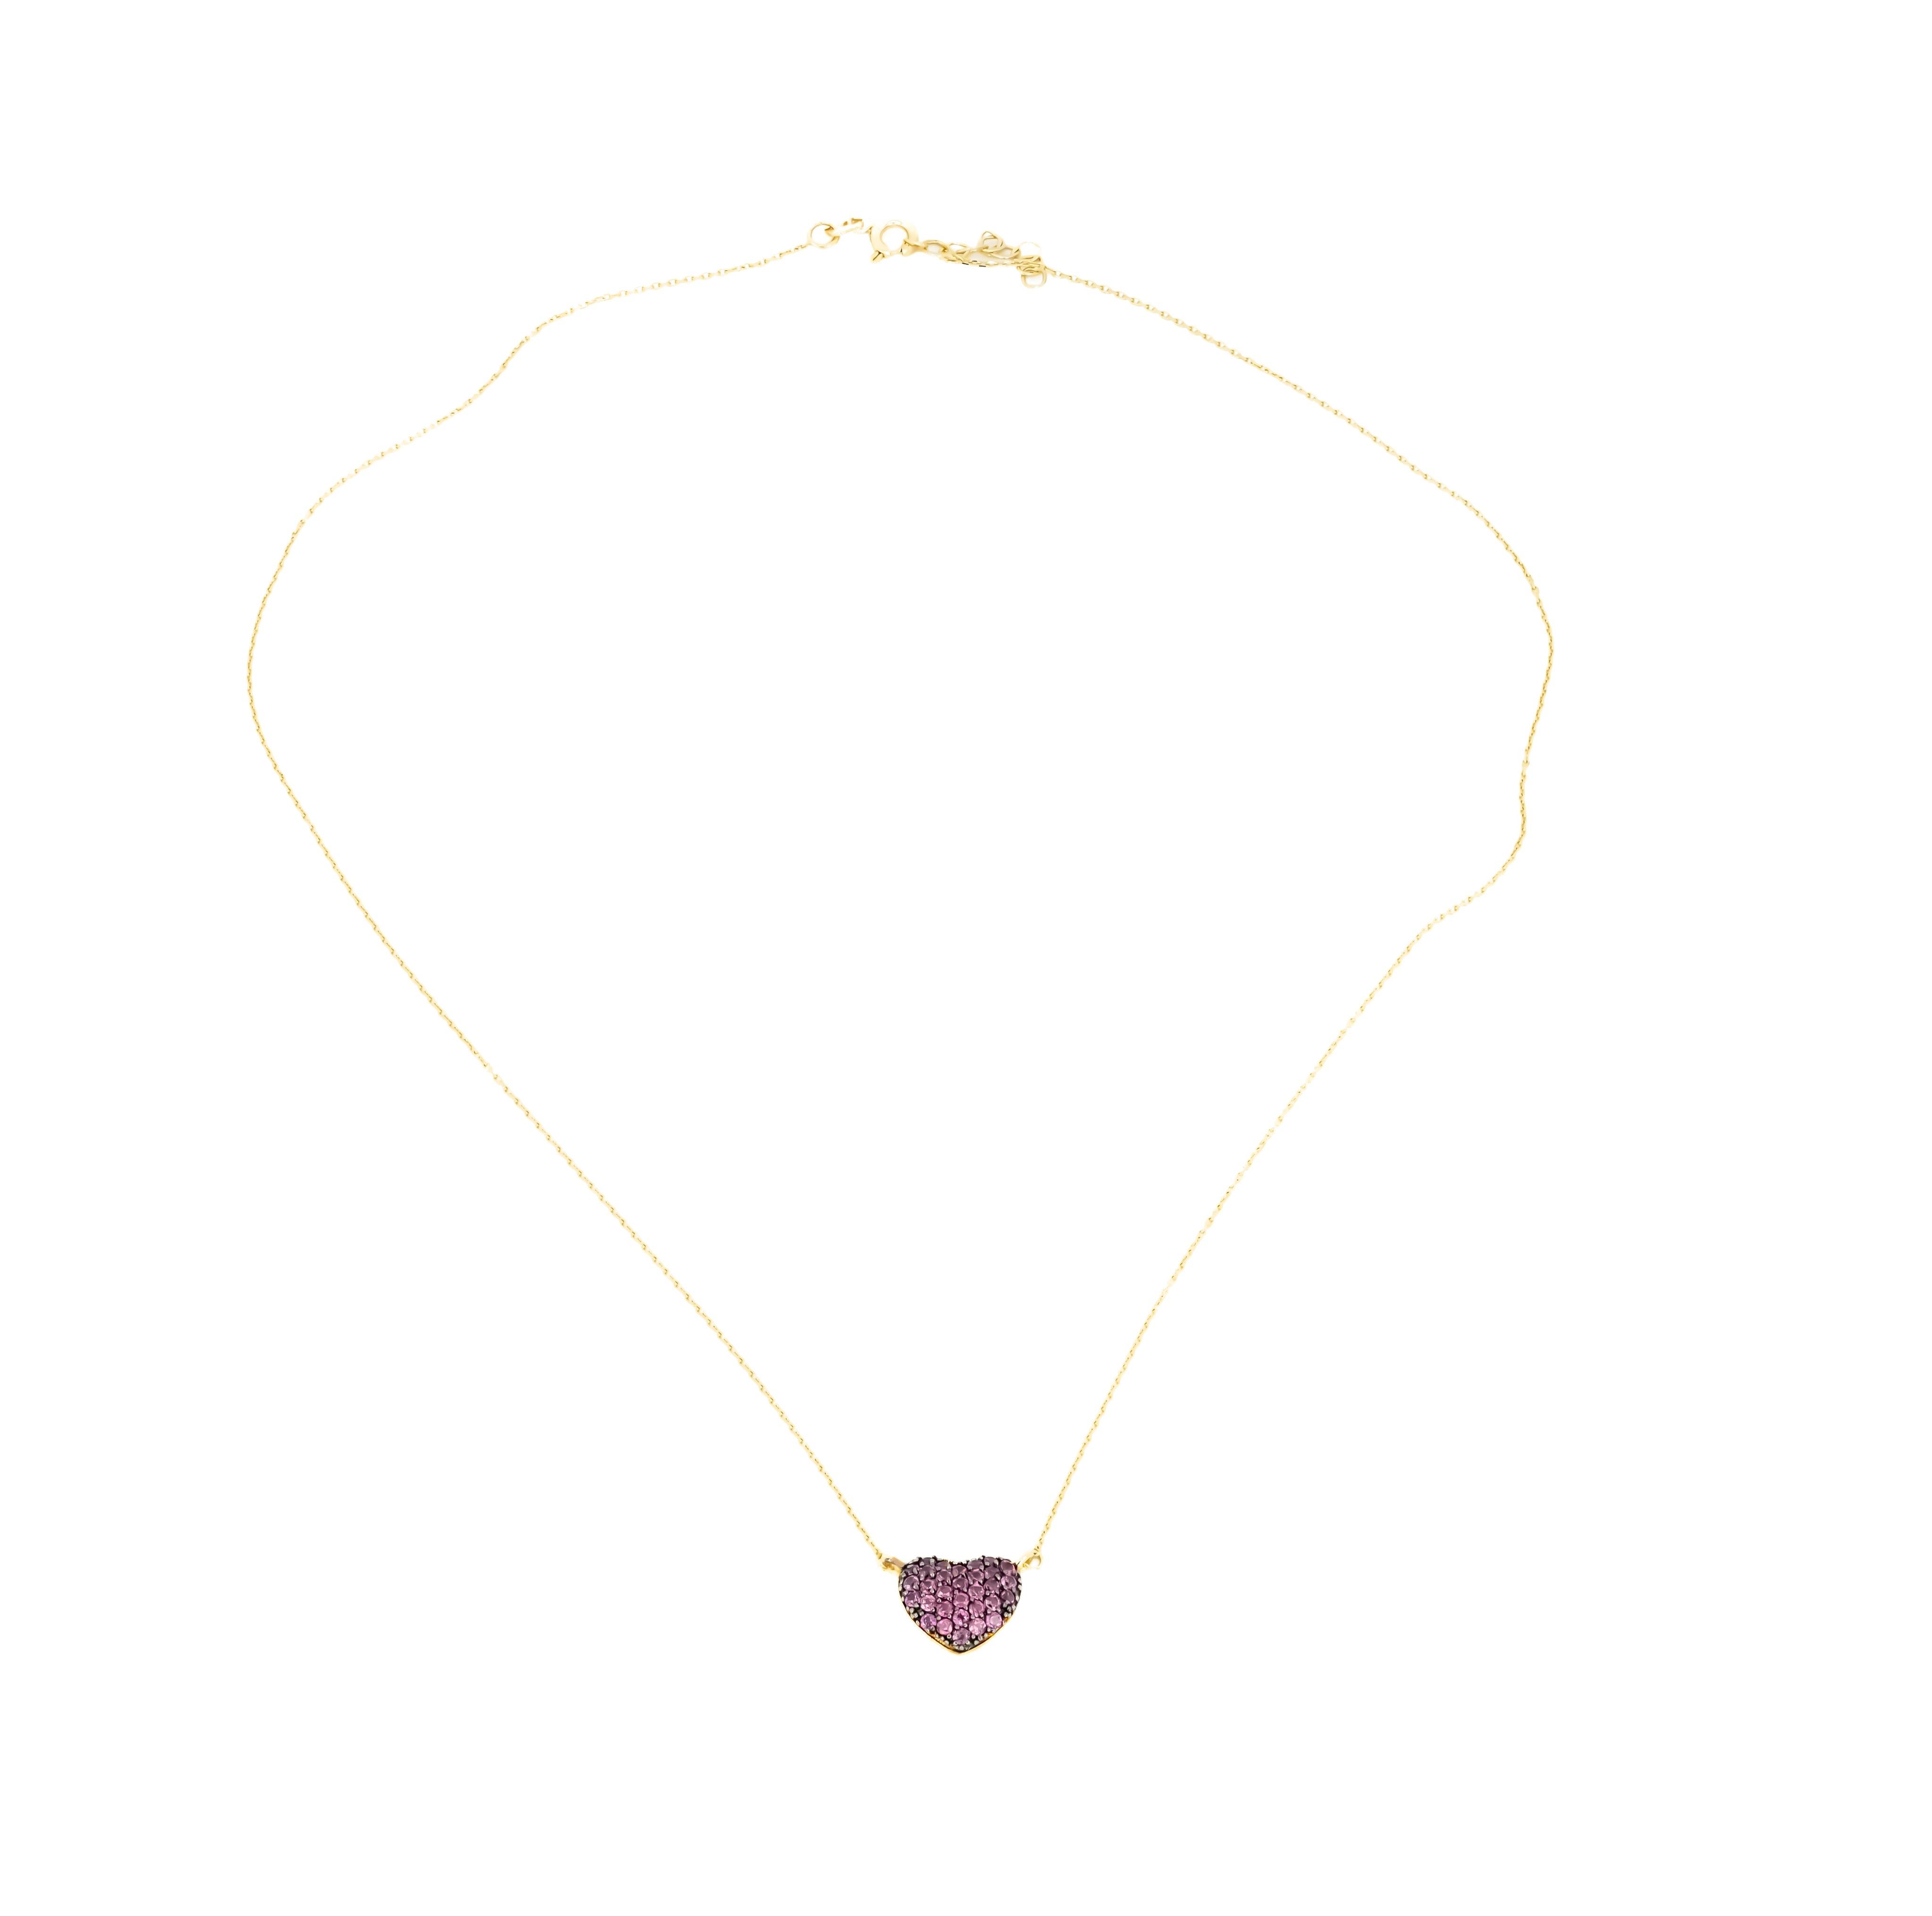 14k Solid Gold heart Pendant necklace. Heart necklace for women. Dainty charm love necklace. Sweet Heart Pendant. Tiny Heart Necklace.

Total weight:  1.49 g.
Pink 14k solid gold
Length: 45 sm.
Style: Minimalist
Gemstones:  pink gemstones, round